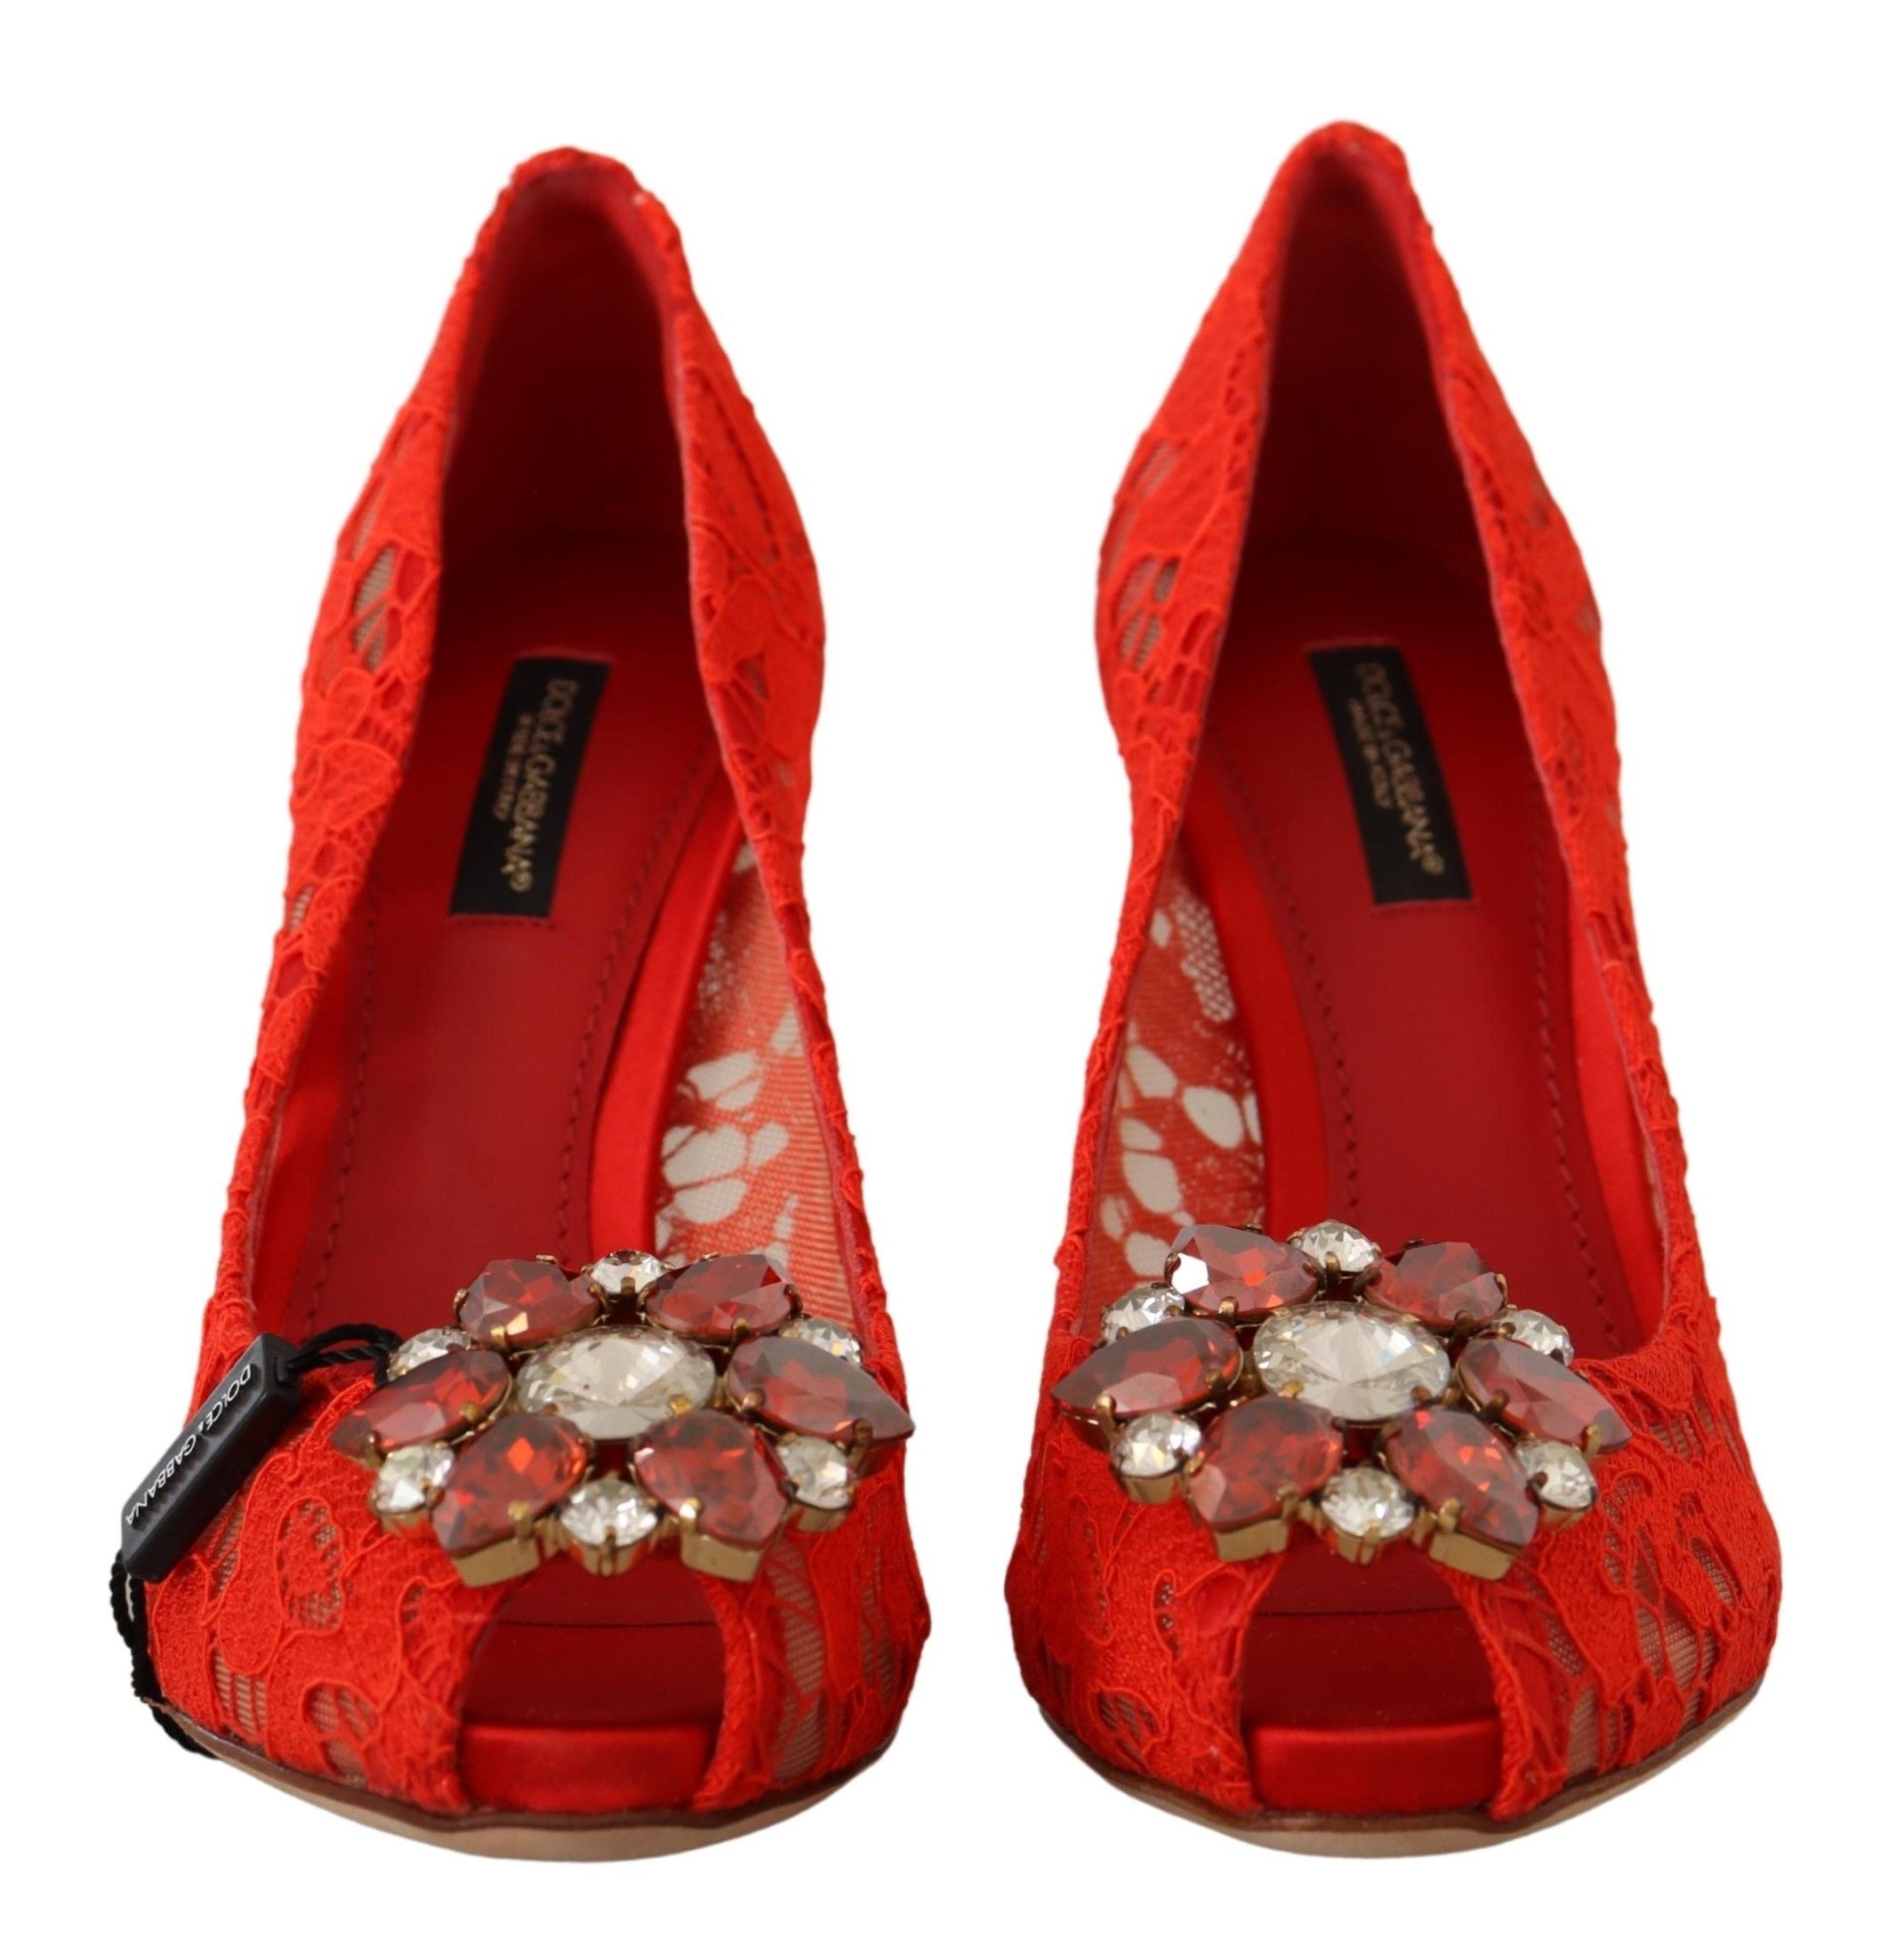 Dolce & Gabbana Red Taormina Lace Crystal Heels Pumps - GENUINE AUTHENTIC BRAND LLC  